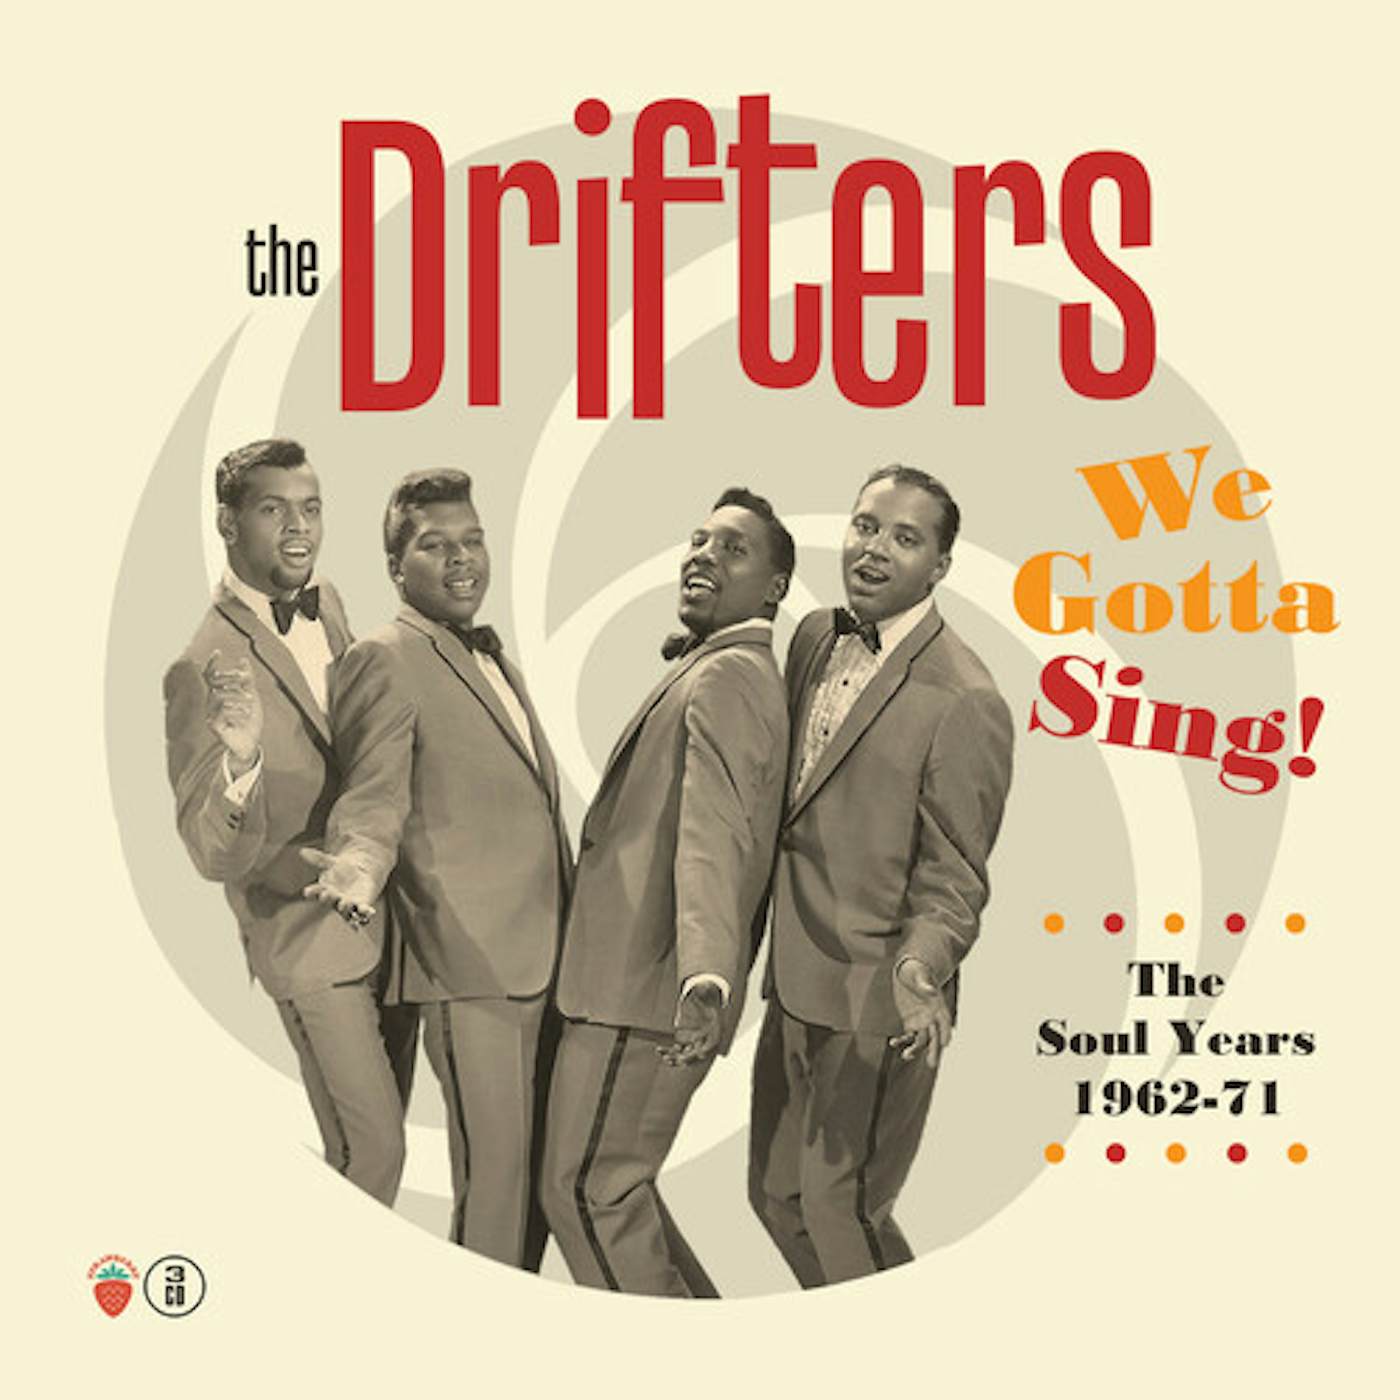 The Drifters WE GOTTA SING: THE SOUL YEARS 1962-1971 CD